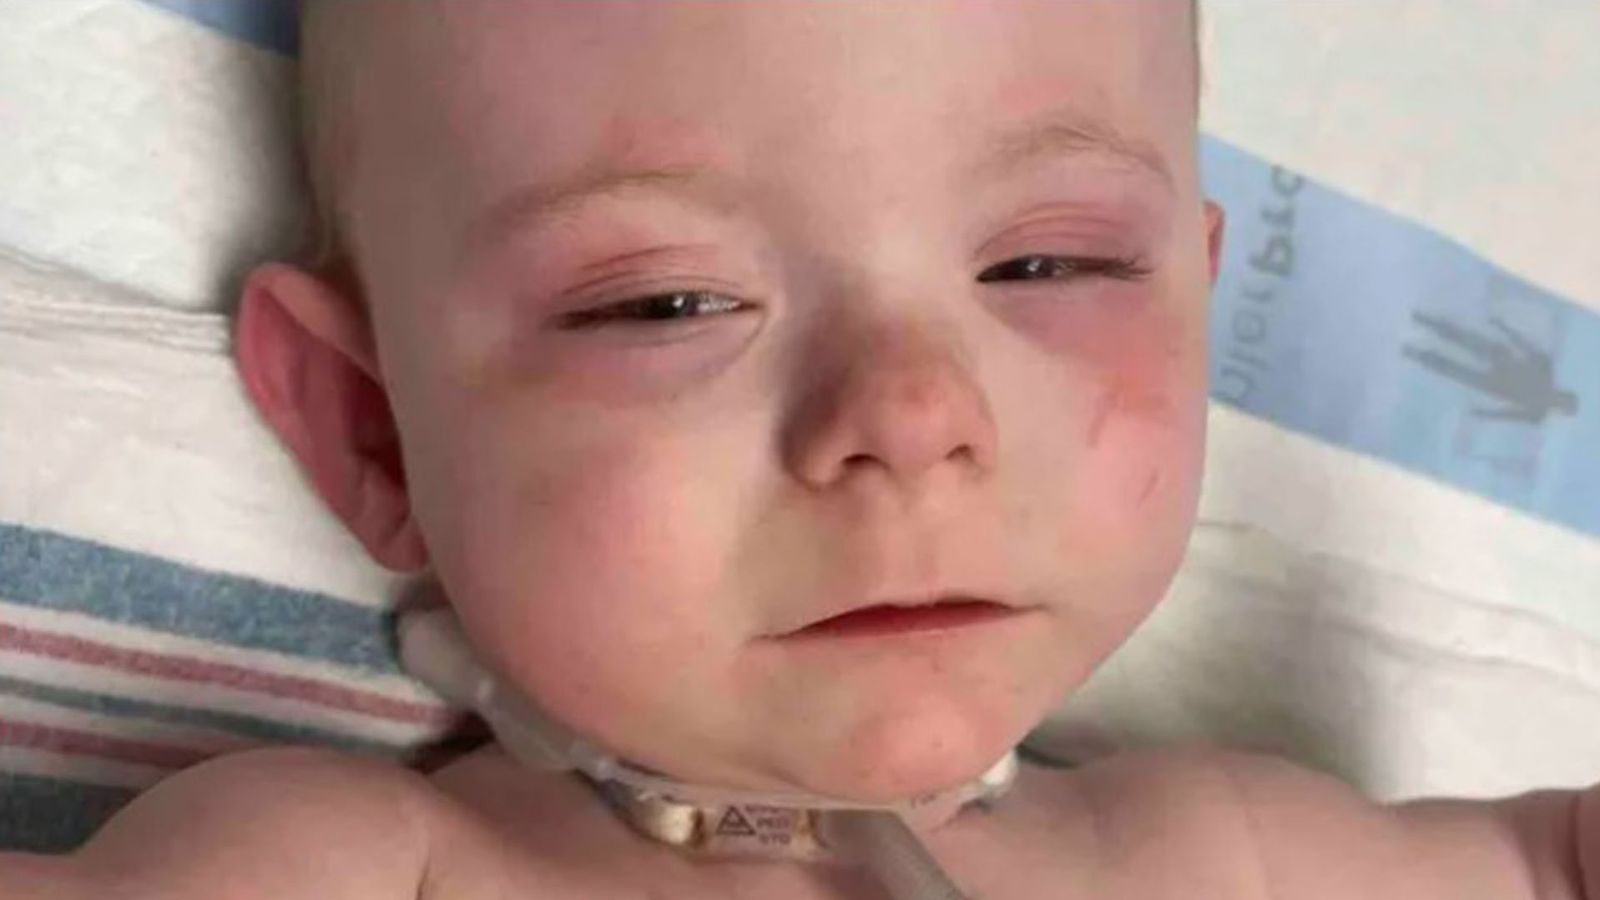 Ohio police raid on 'wrong house' left sick baby with burns, mum claims